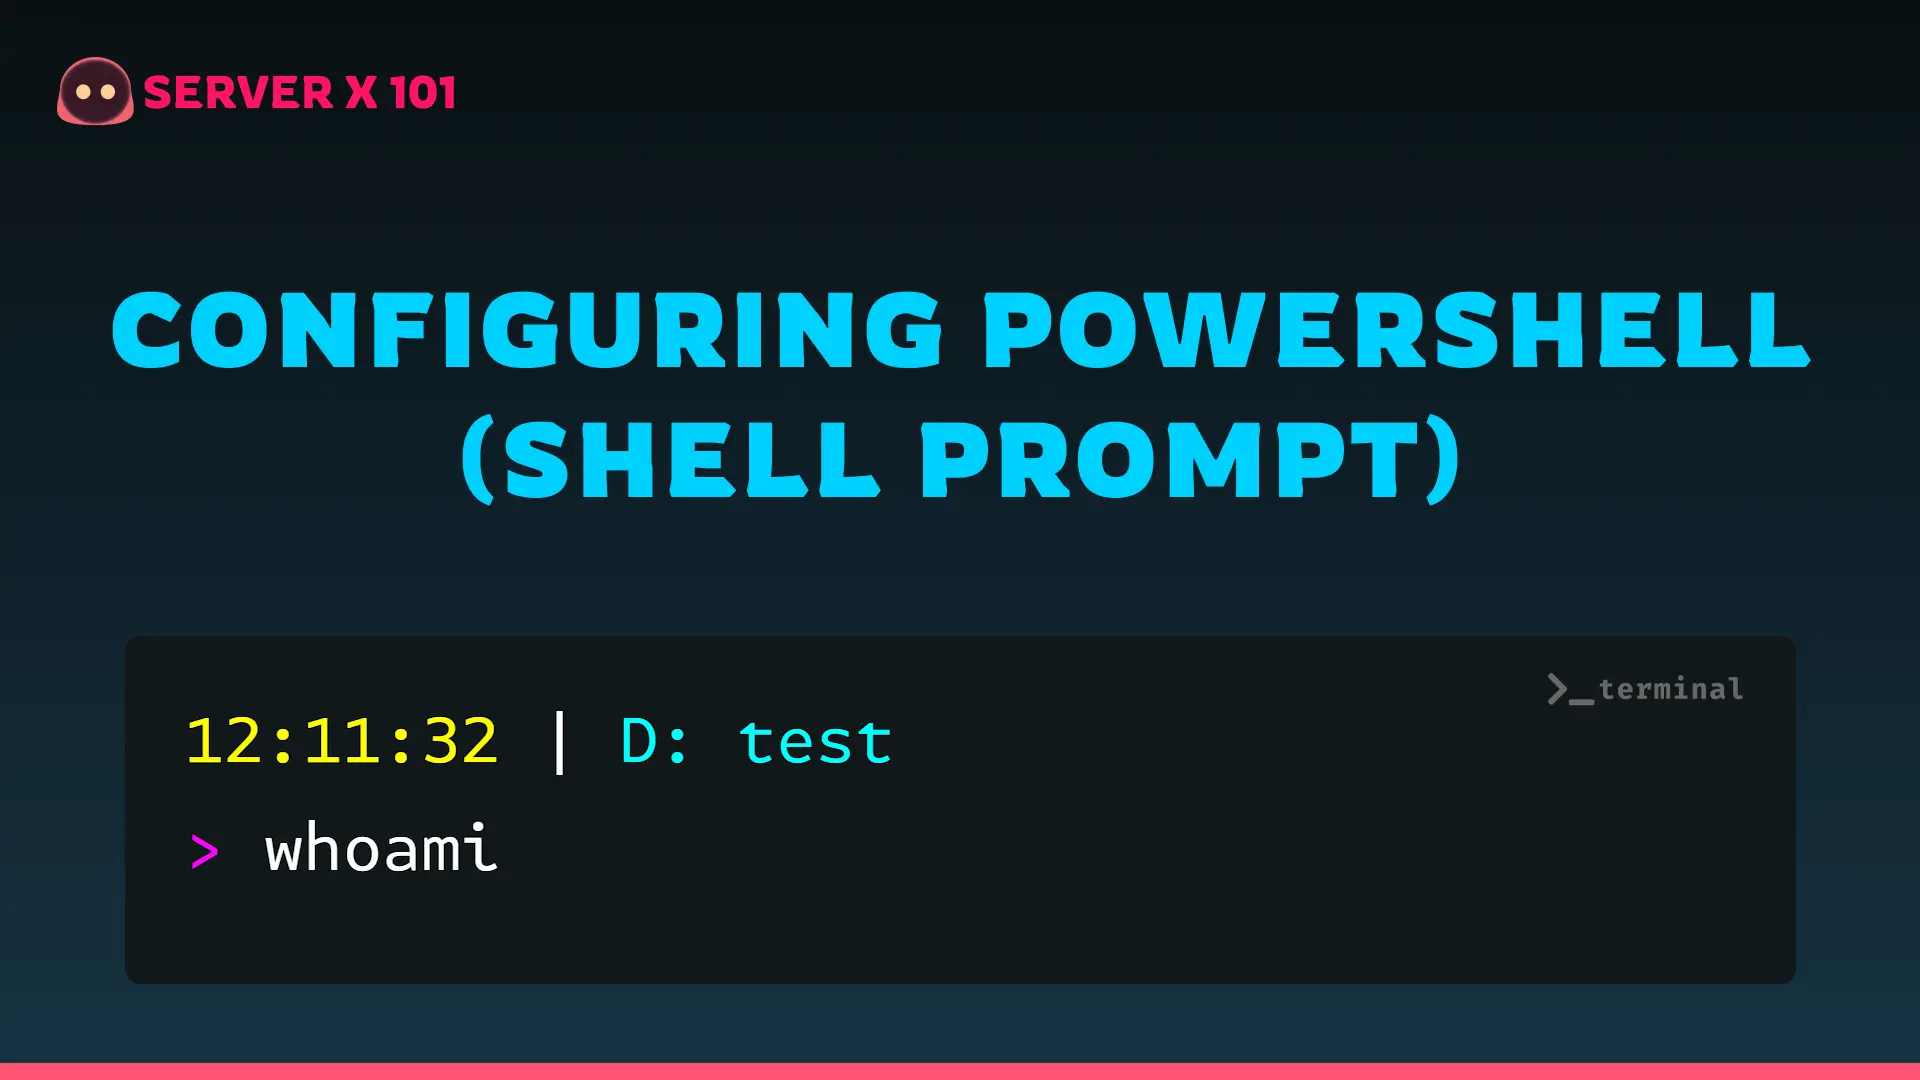 Configuring PowerShell (shell prompt)